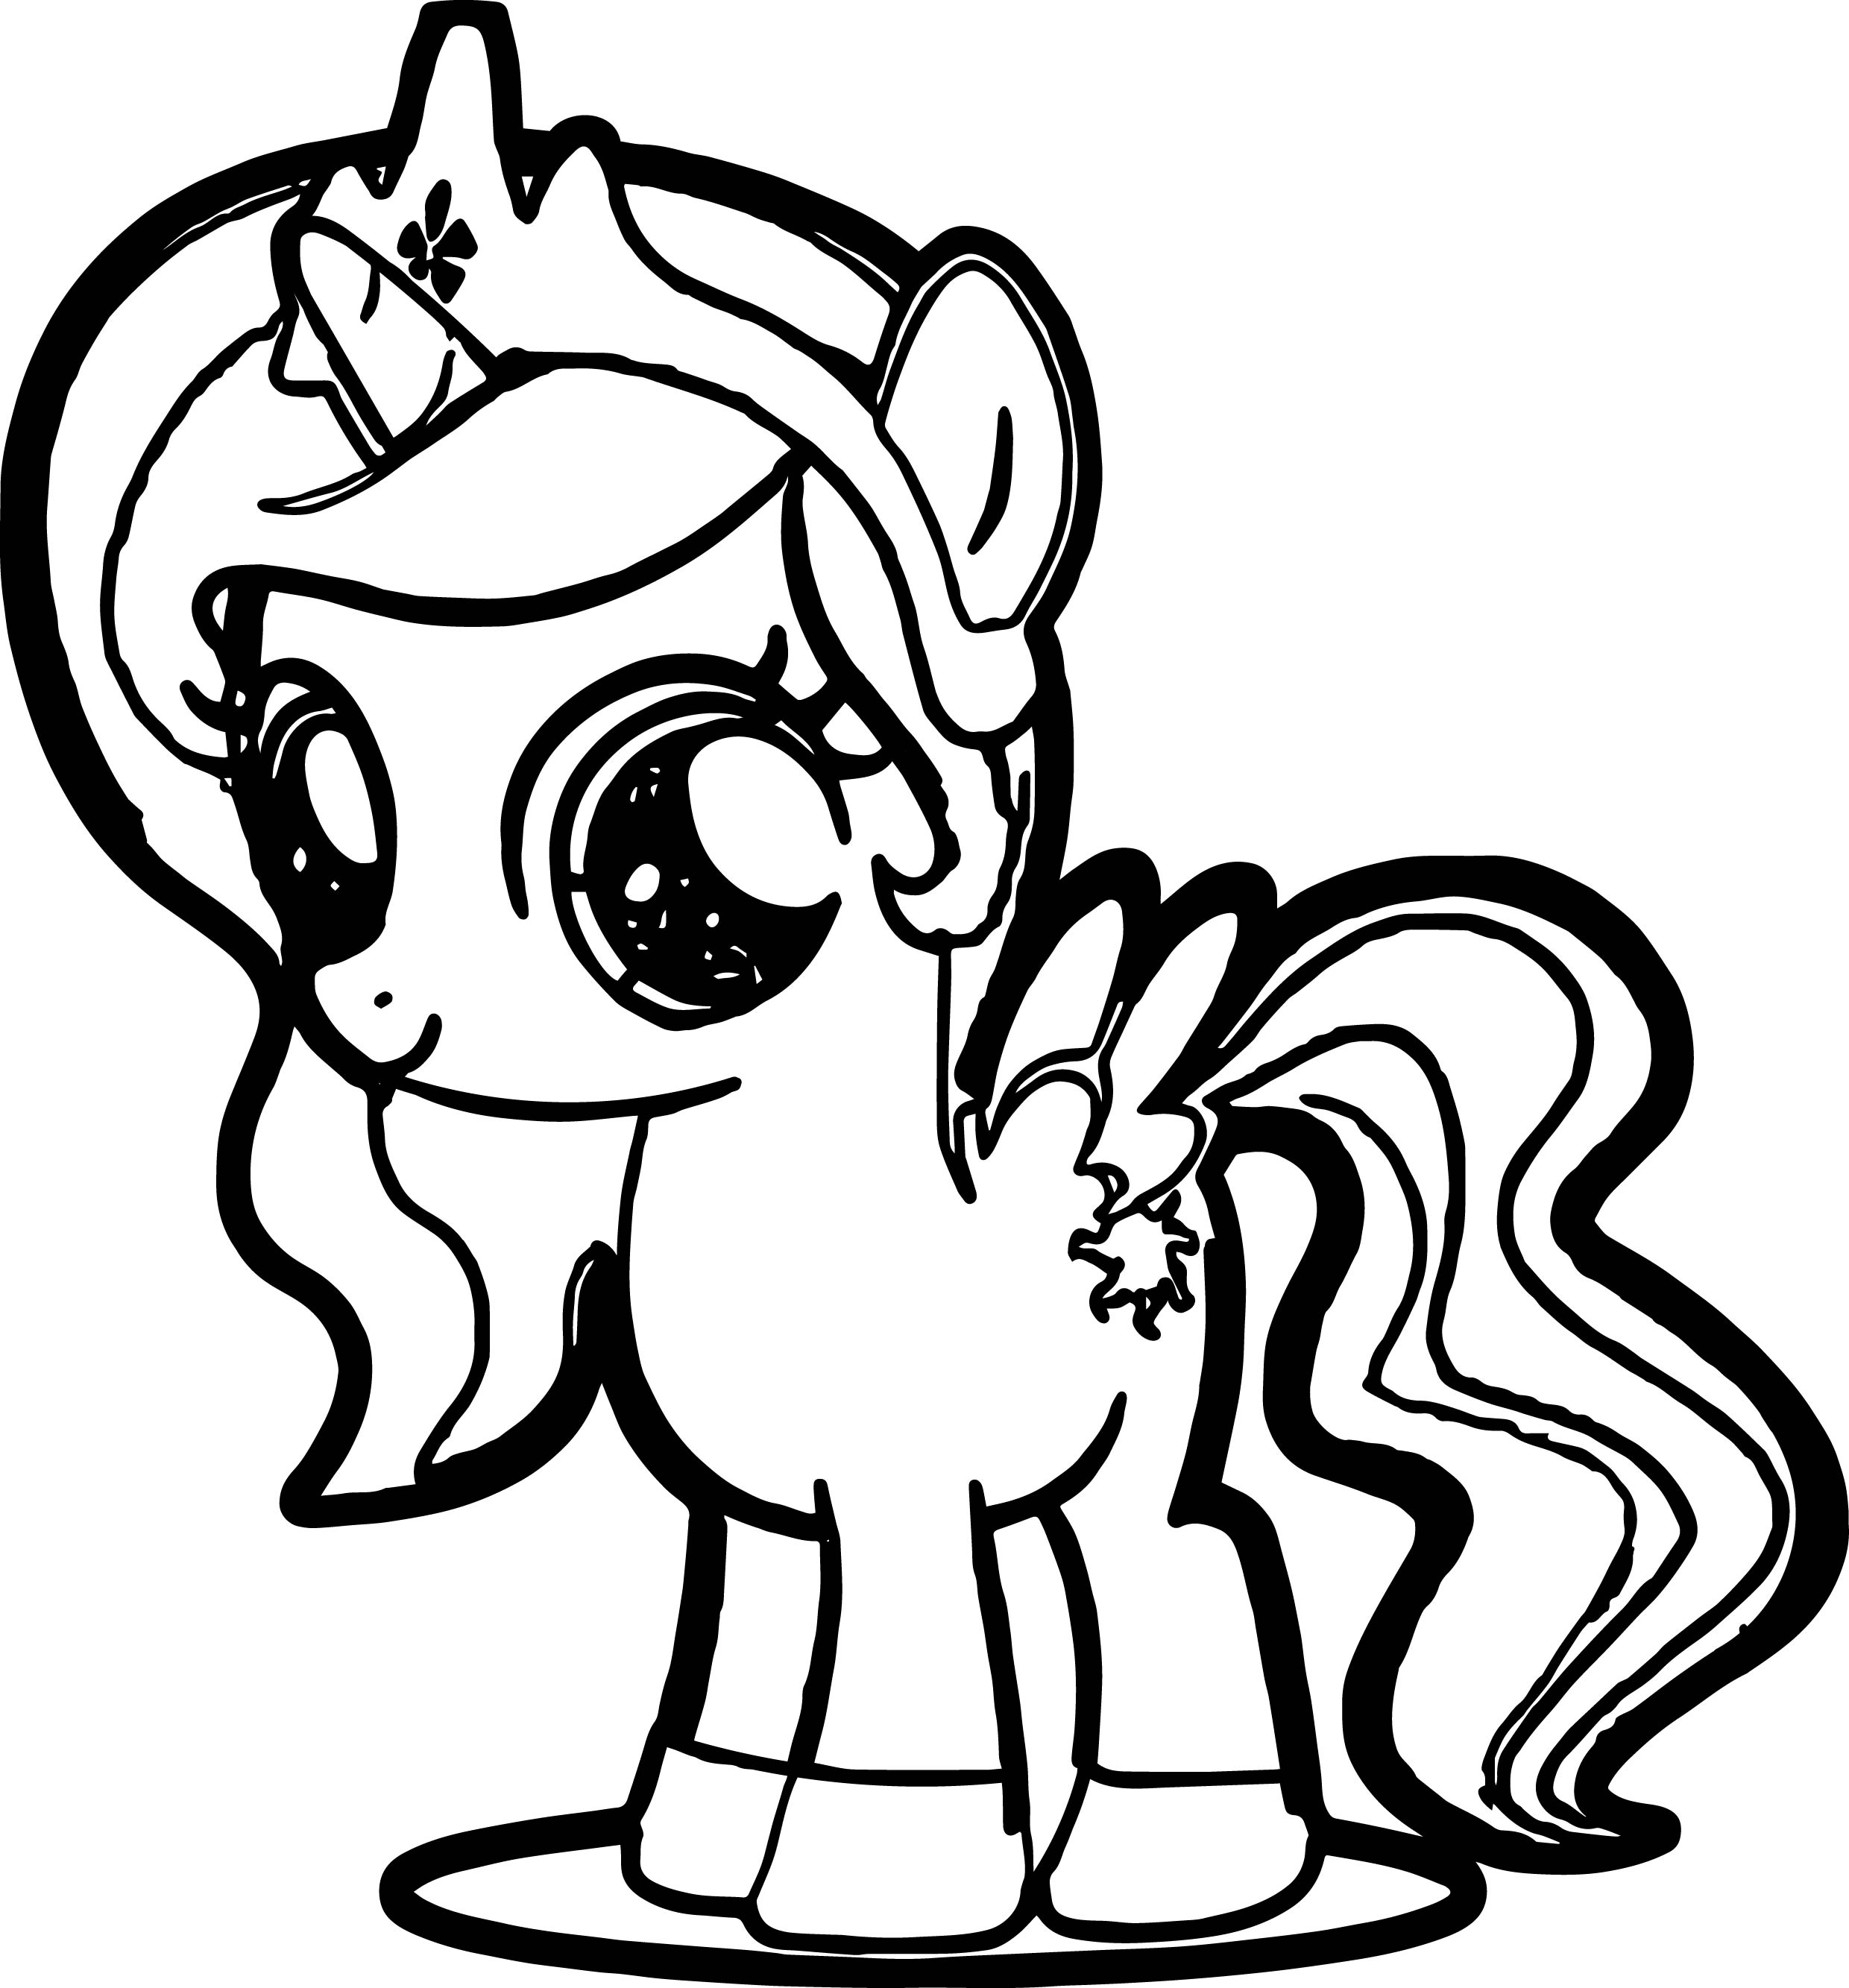 Cute My Little Pony Coloring Pages at GetColorings.com | Free printable